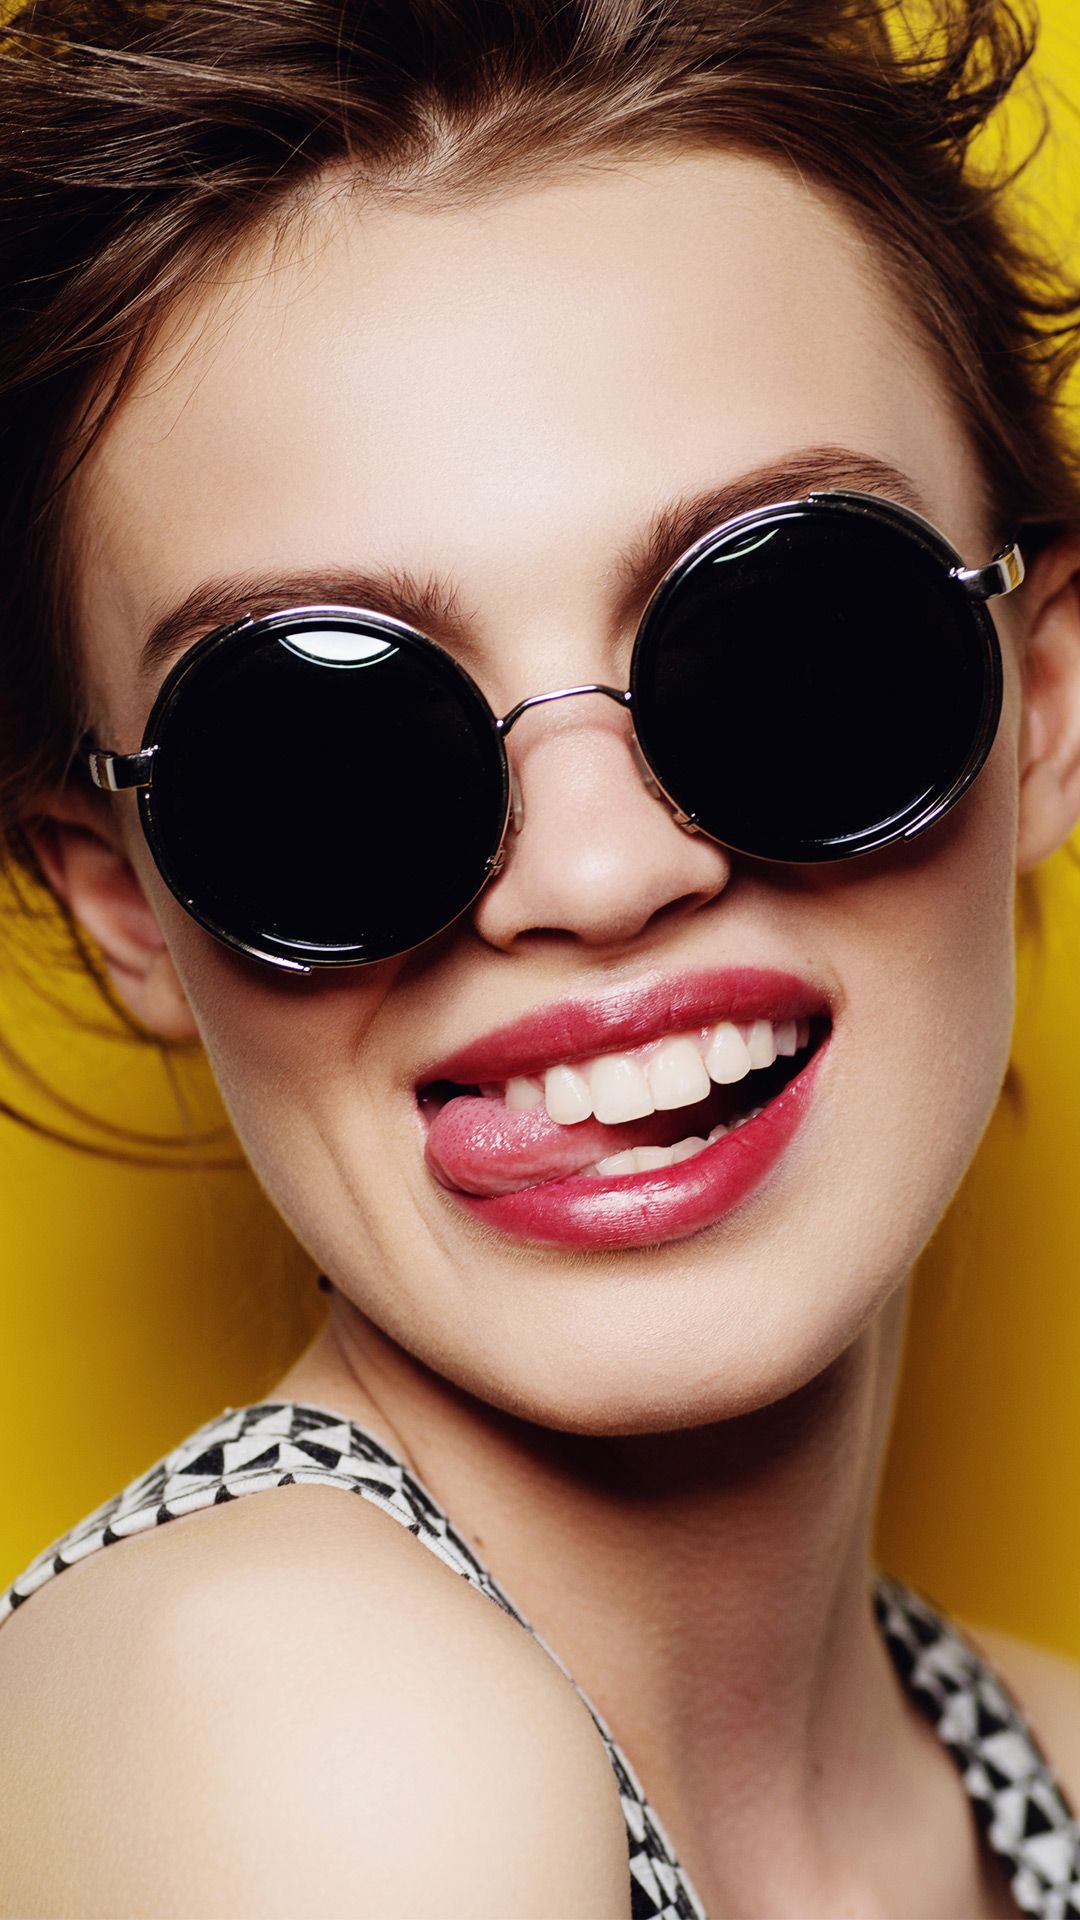 Embrace Your Style with Round Sunglasses